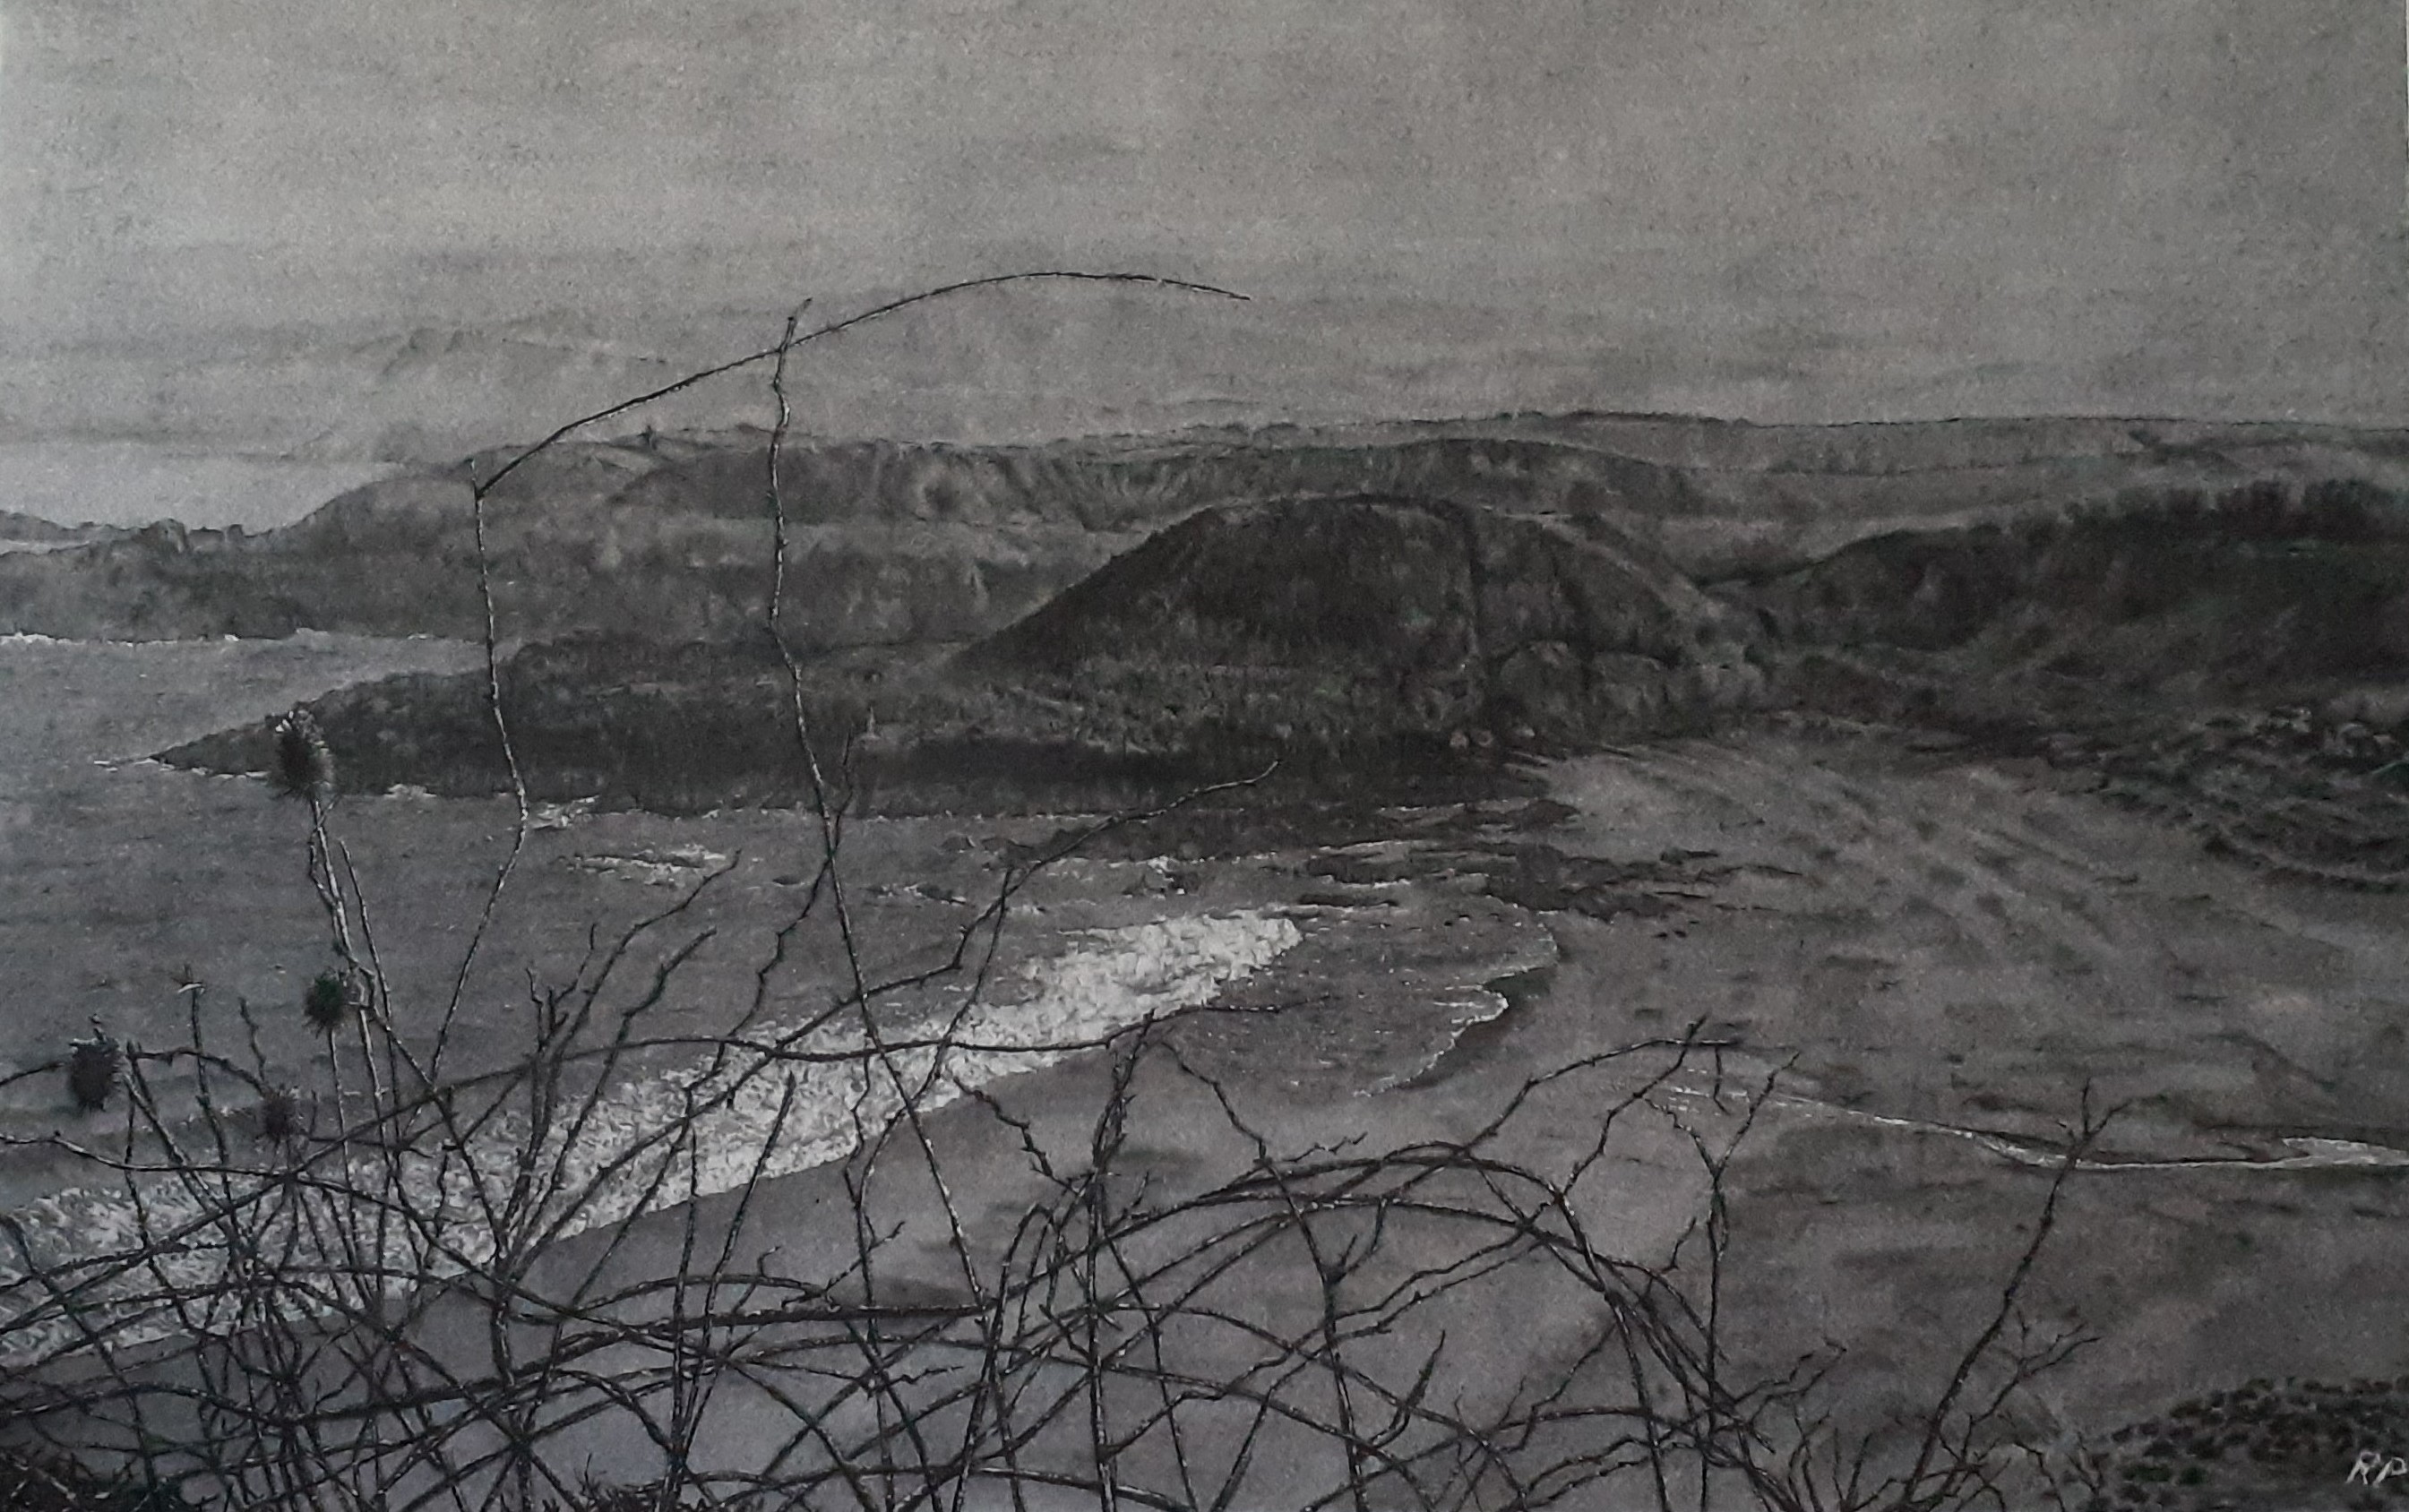 'Emerging from the Haar' - Coldingham Bay', Rowena Price, Charcoal on Paper, 48 x 62 cm